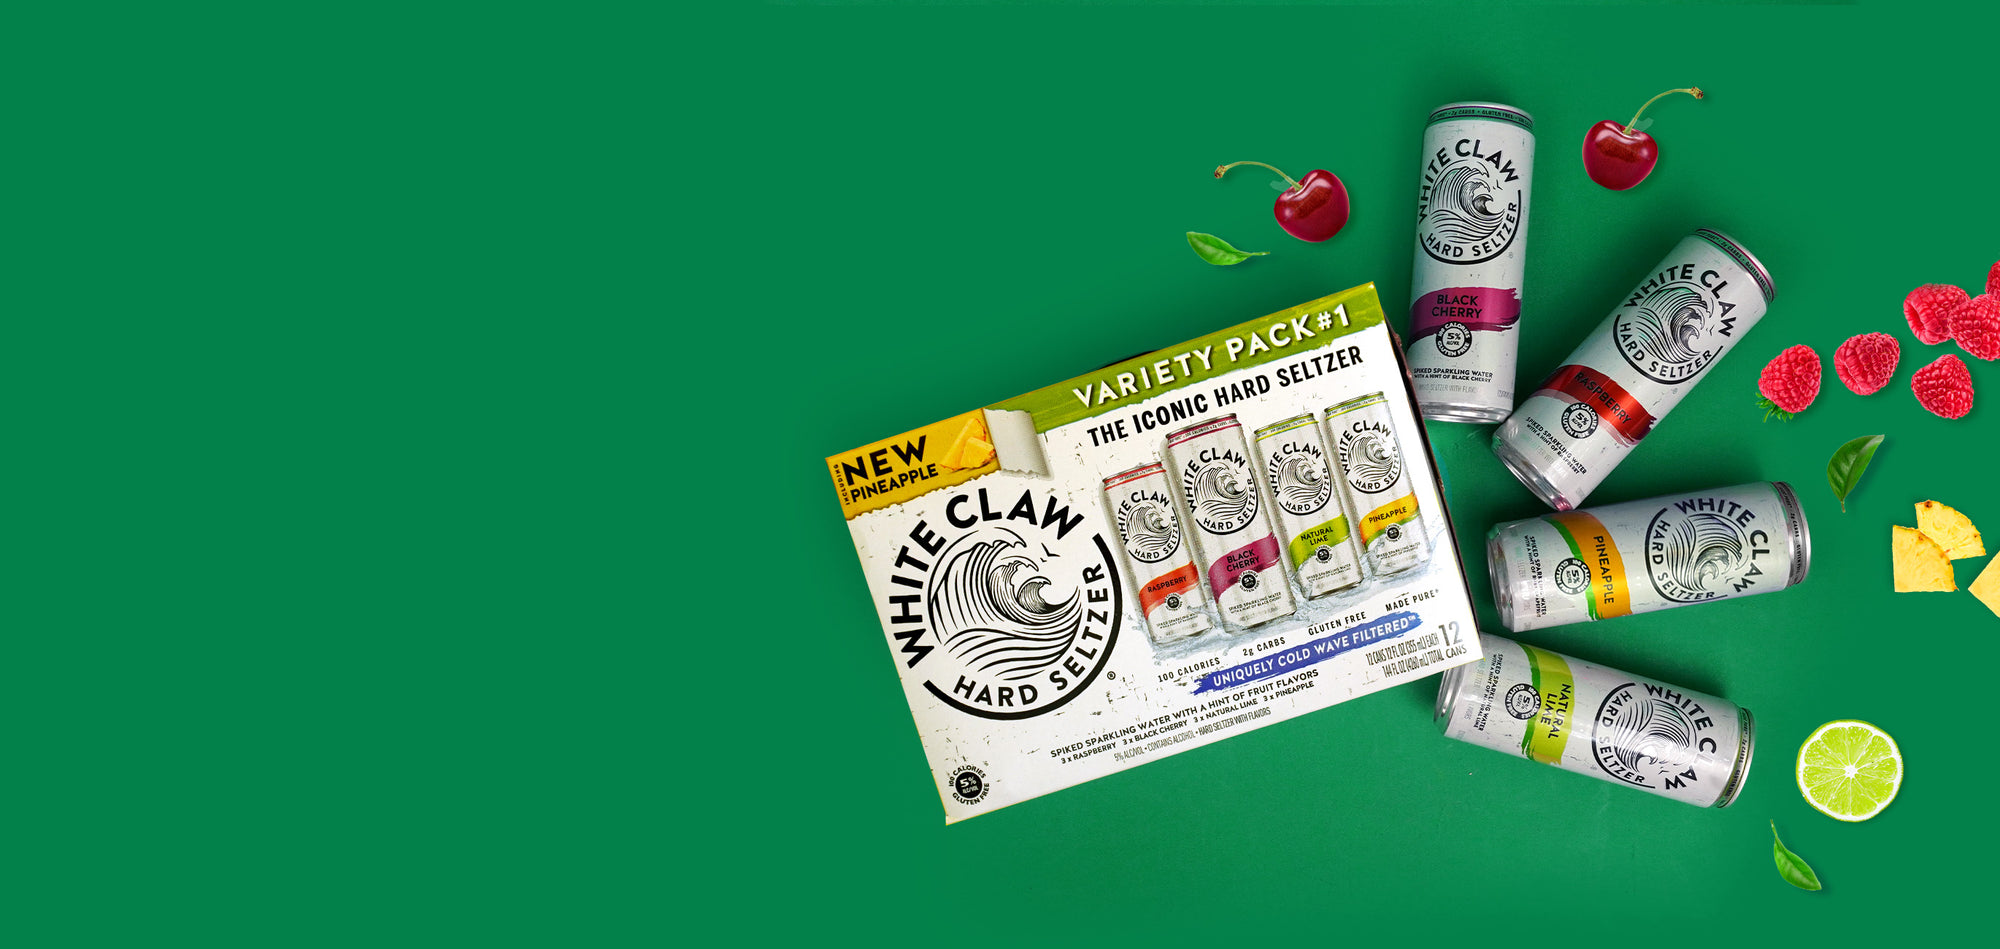 White Claw Variety Set No.1 (Raspberry, Black Cherry, Natural Lime, Pineapple)